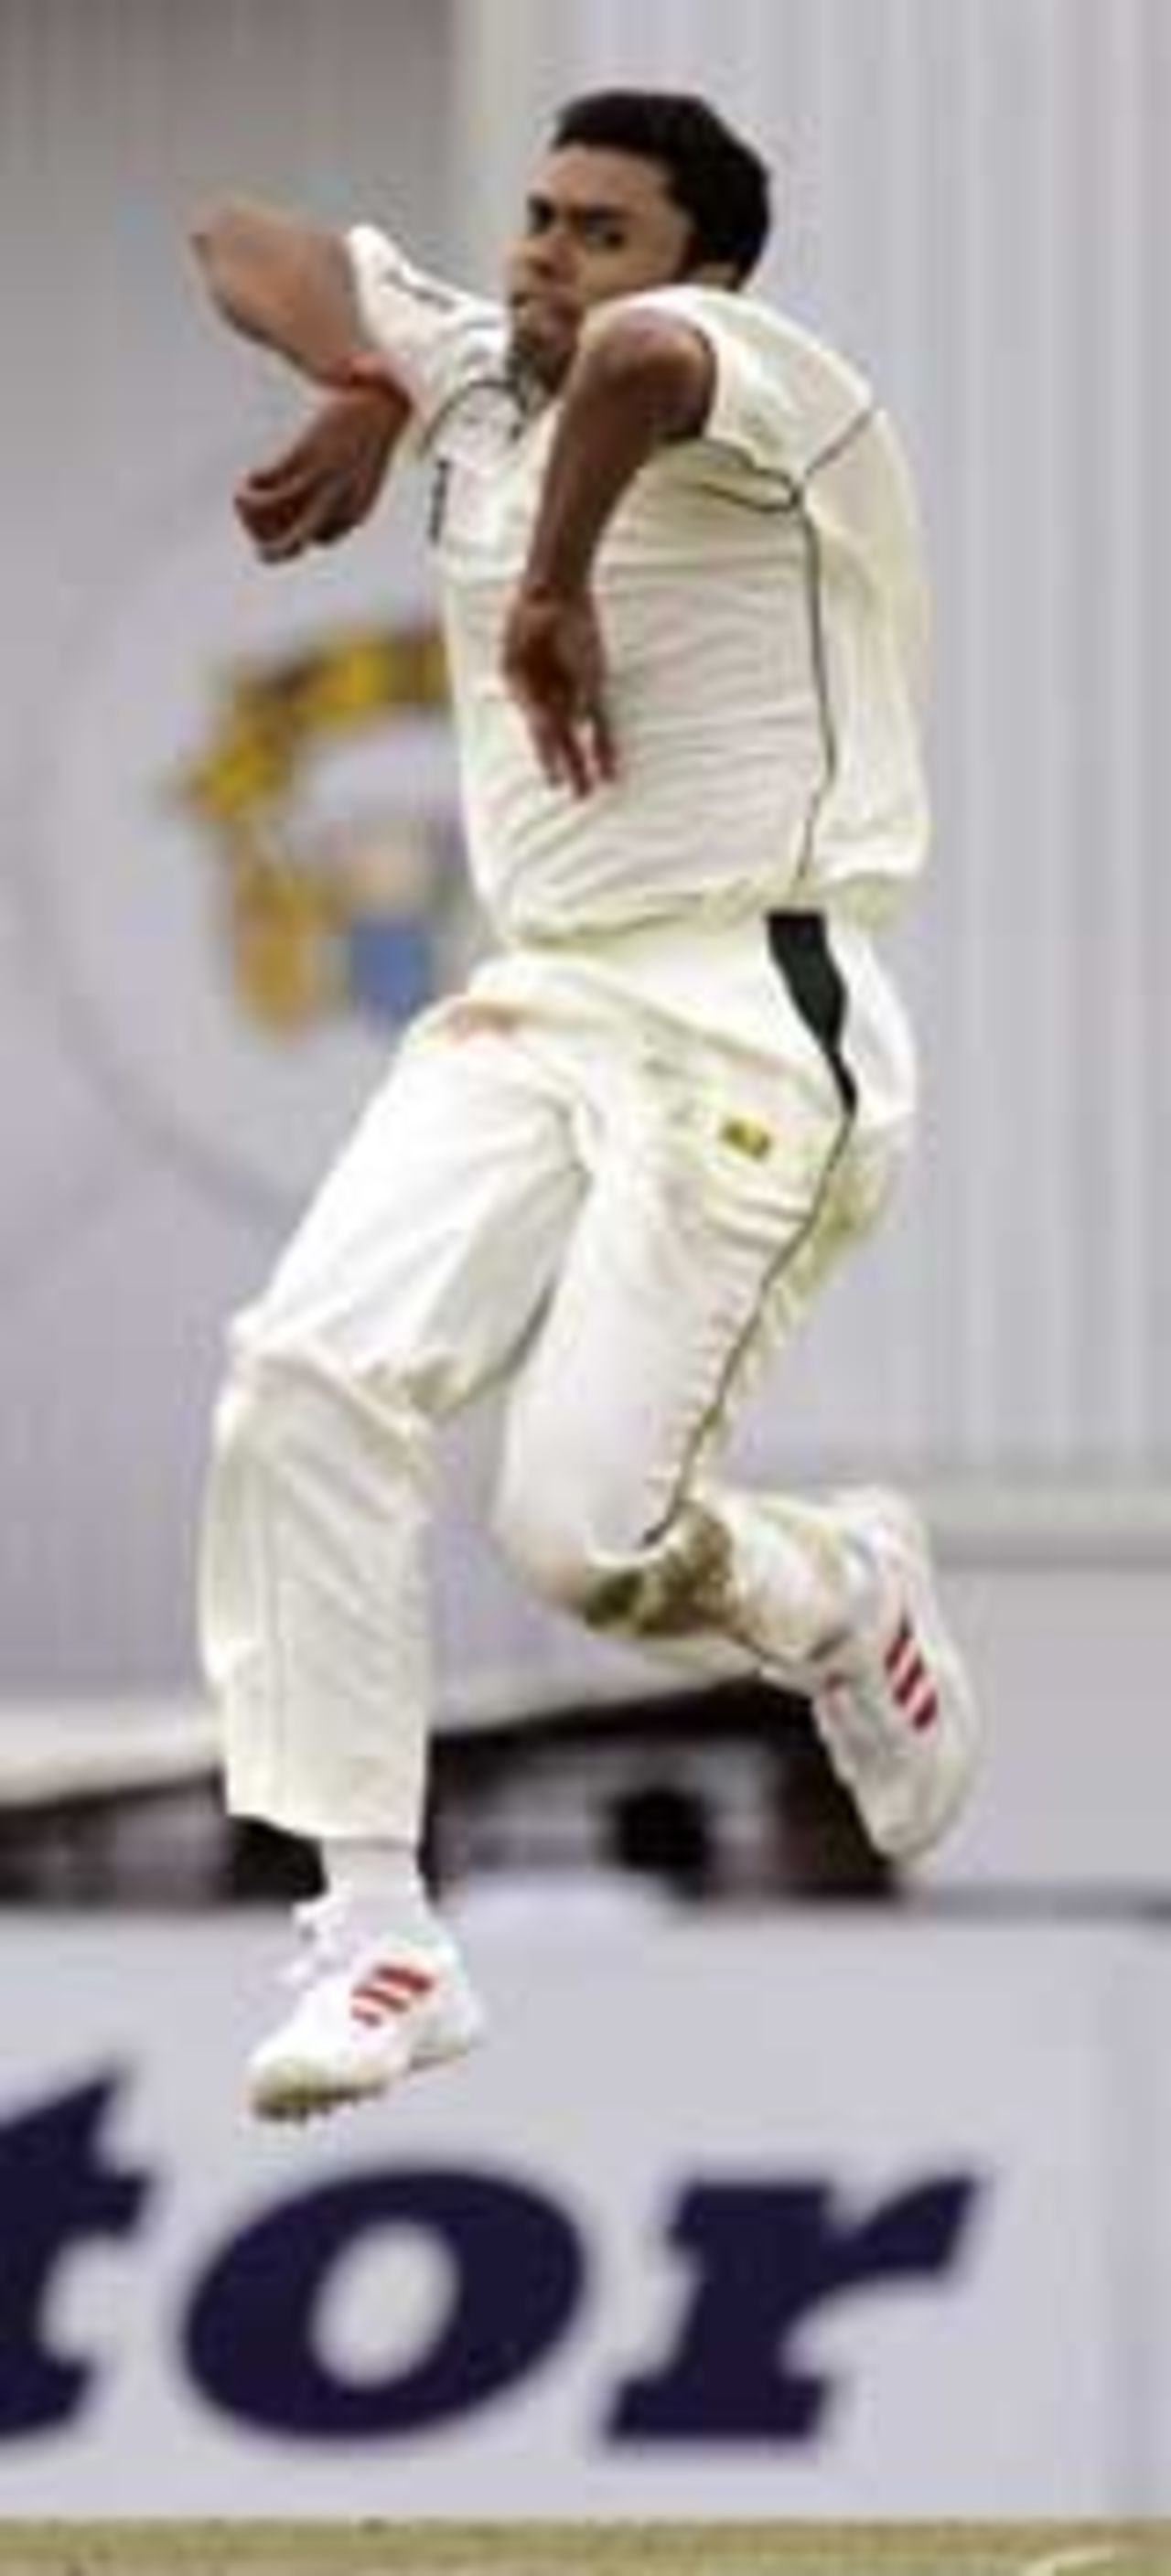 Danish Kaneria in action against India, India v Pakistan, 1st Test, Mohali, March 9, 2005